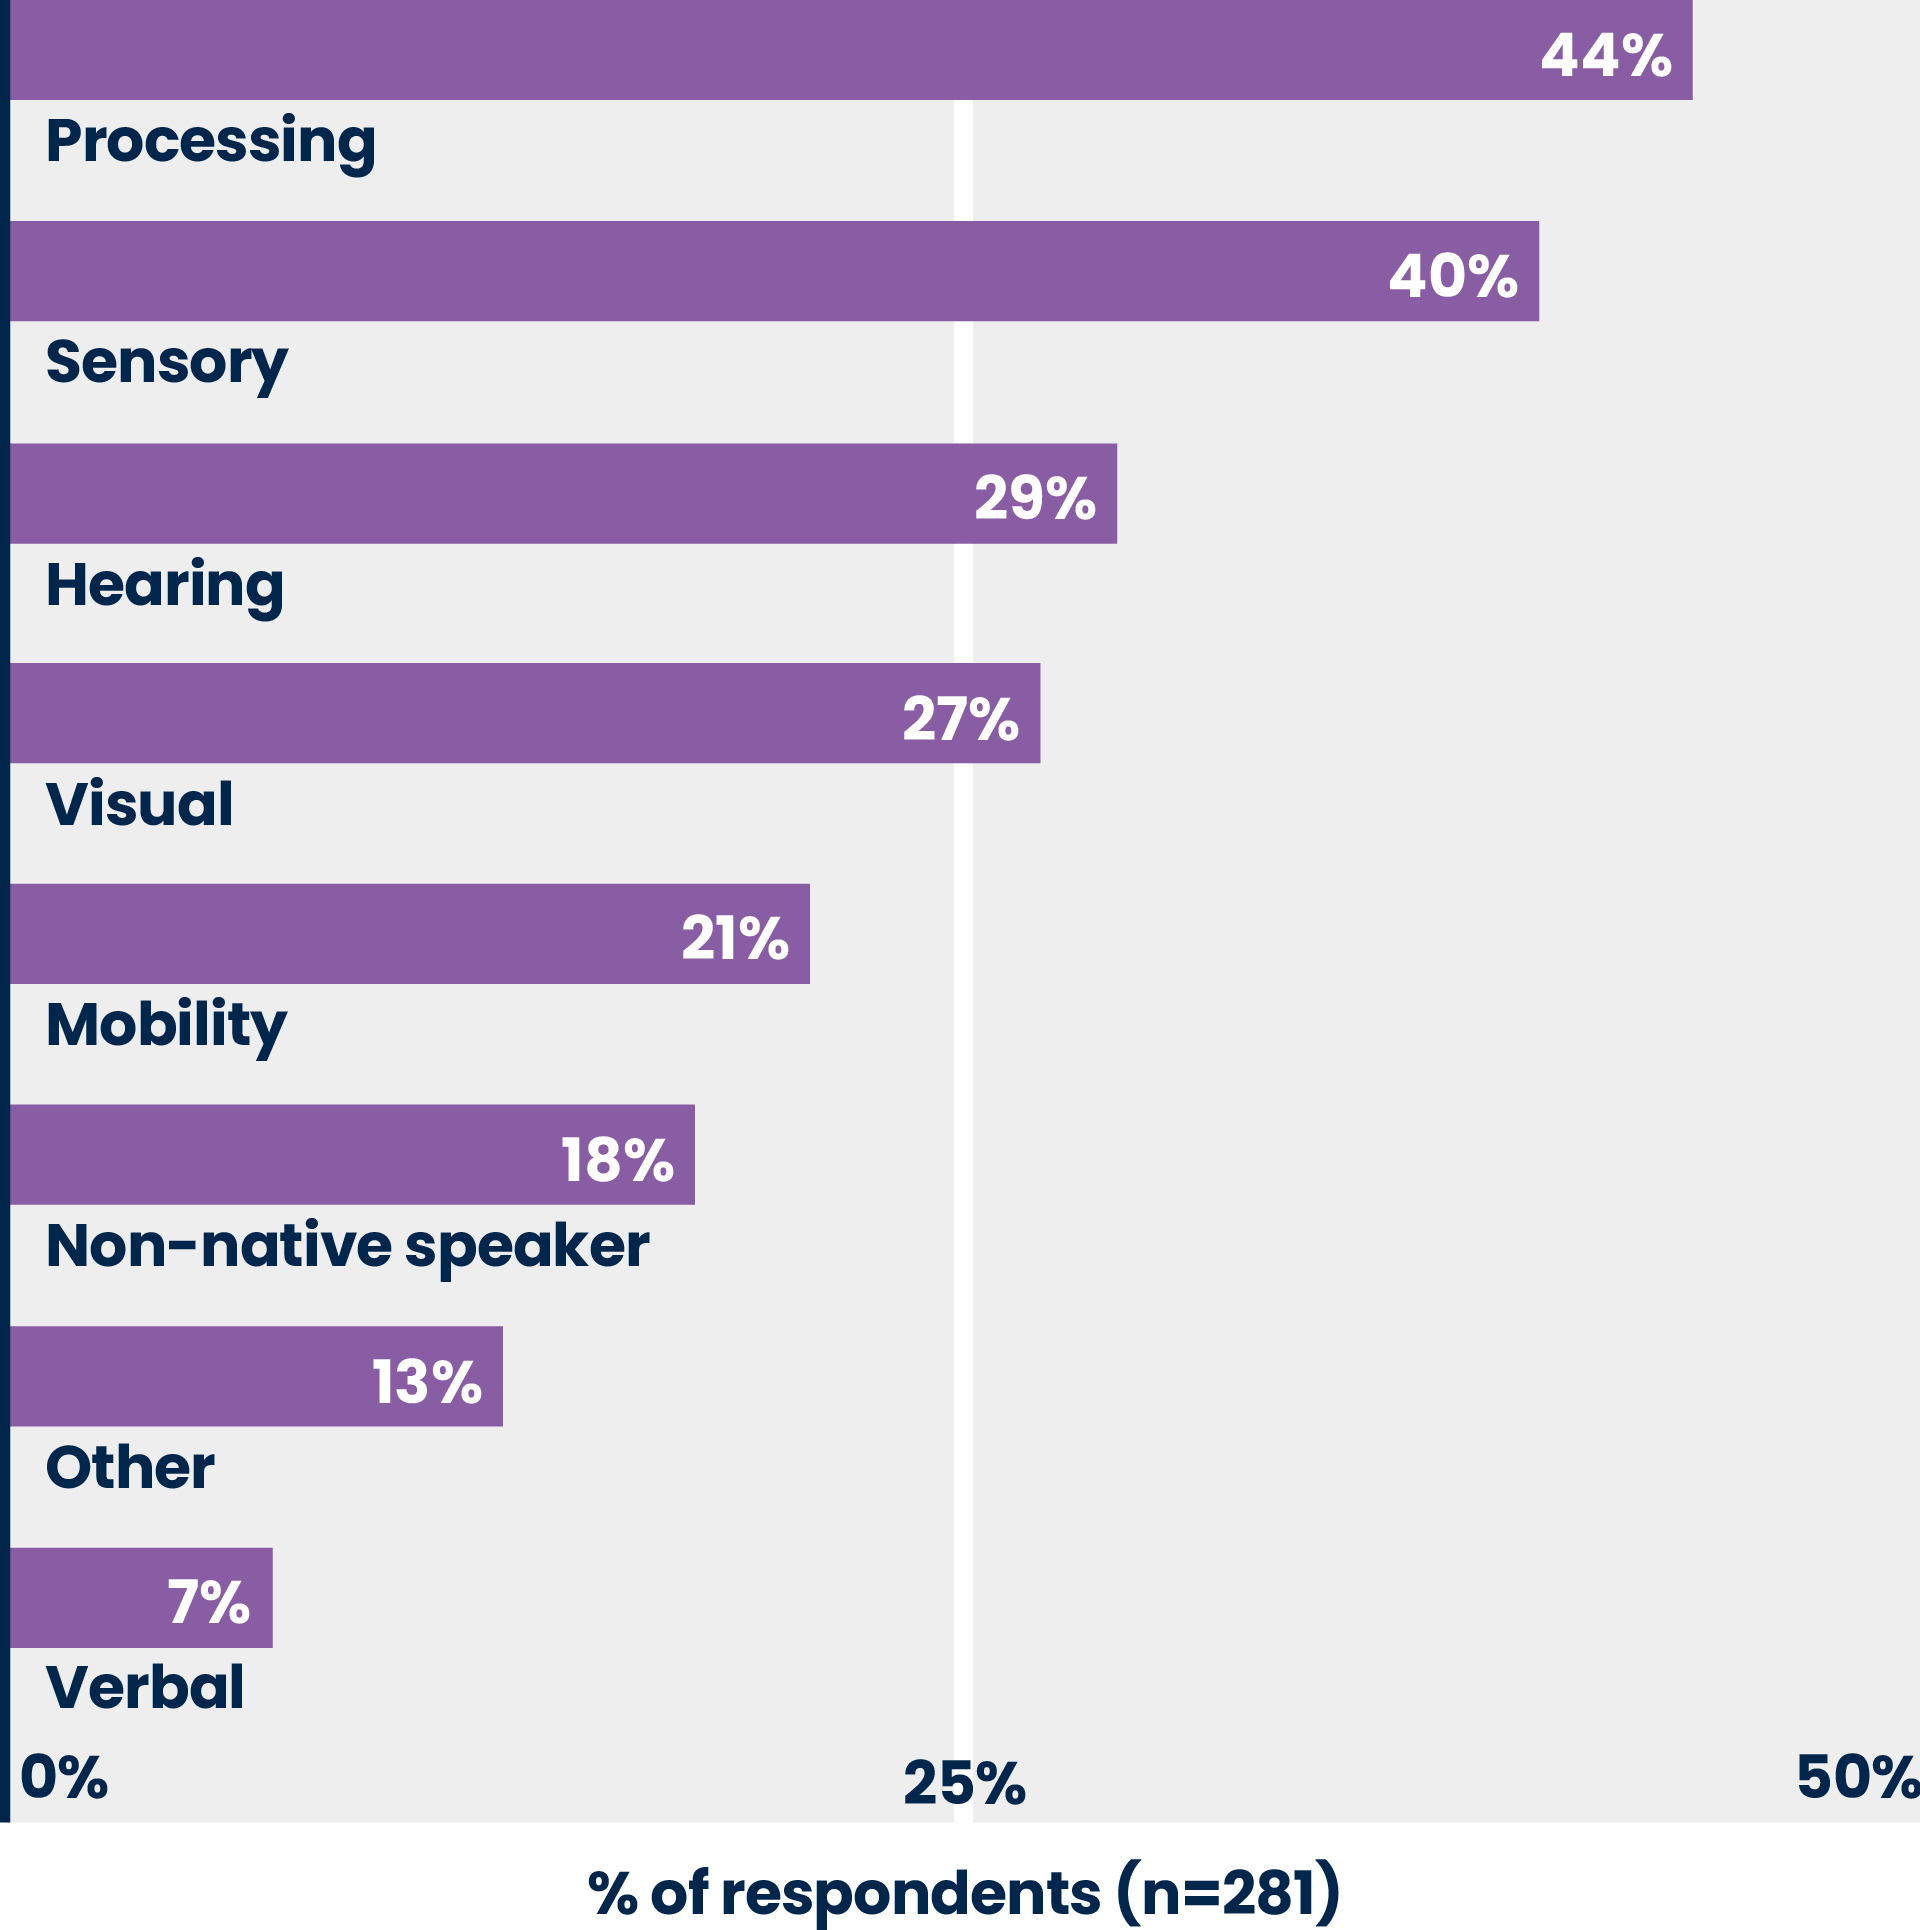 A bar graph with the percentage of respondents (n=281) is on the X-axis and categories of accessibility needs or disabilities are on the Y-axis presented in descending prevalence: processing, 44%; sensory, 40%; hearing, 29%; visual, 27%; mobility, 21%; non-native speaker, 18%; other, 13%; verbal, 7%.